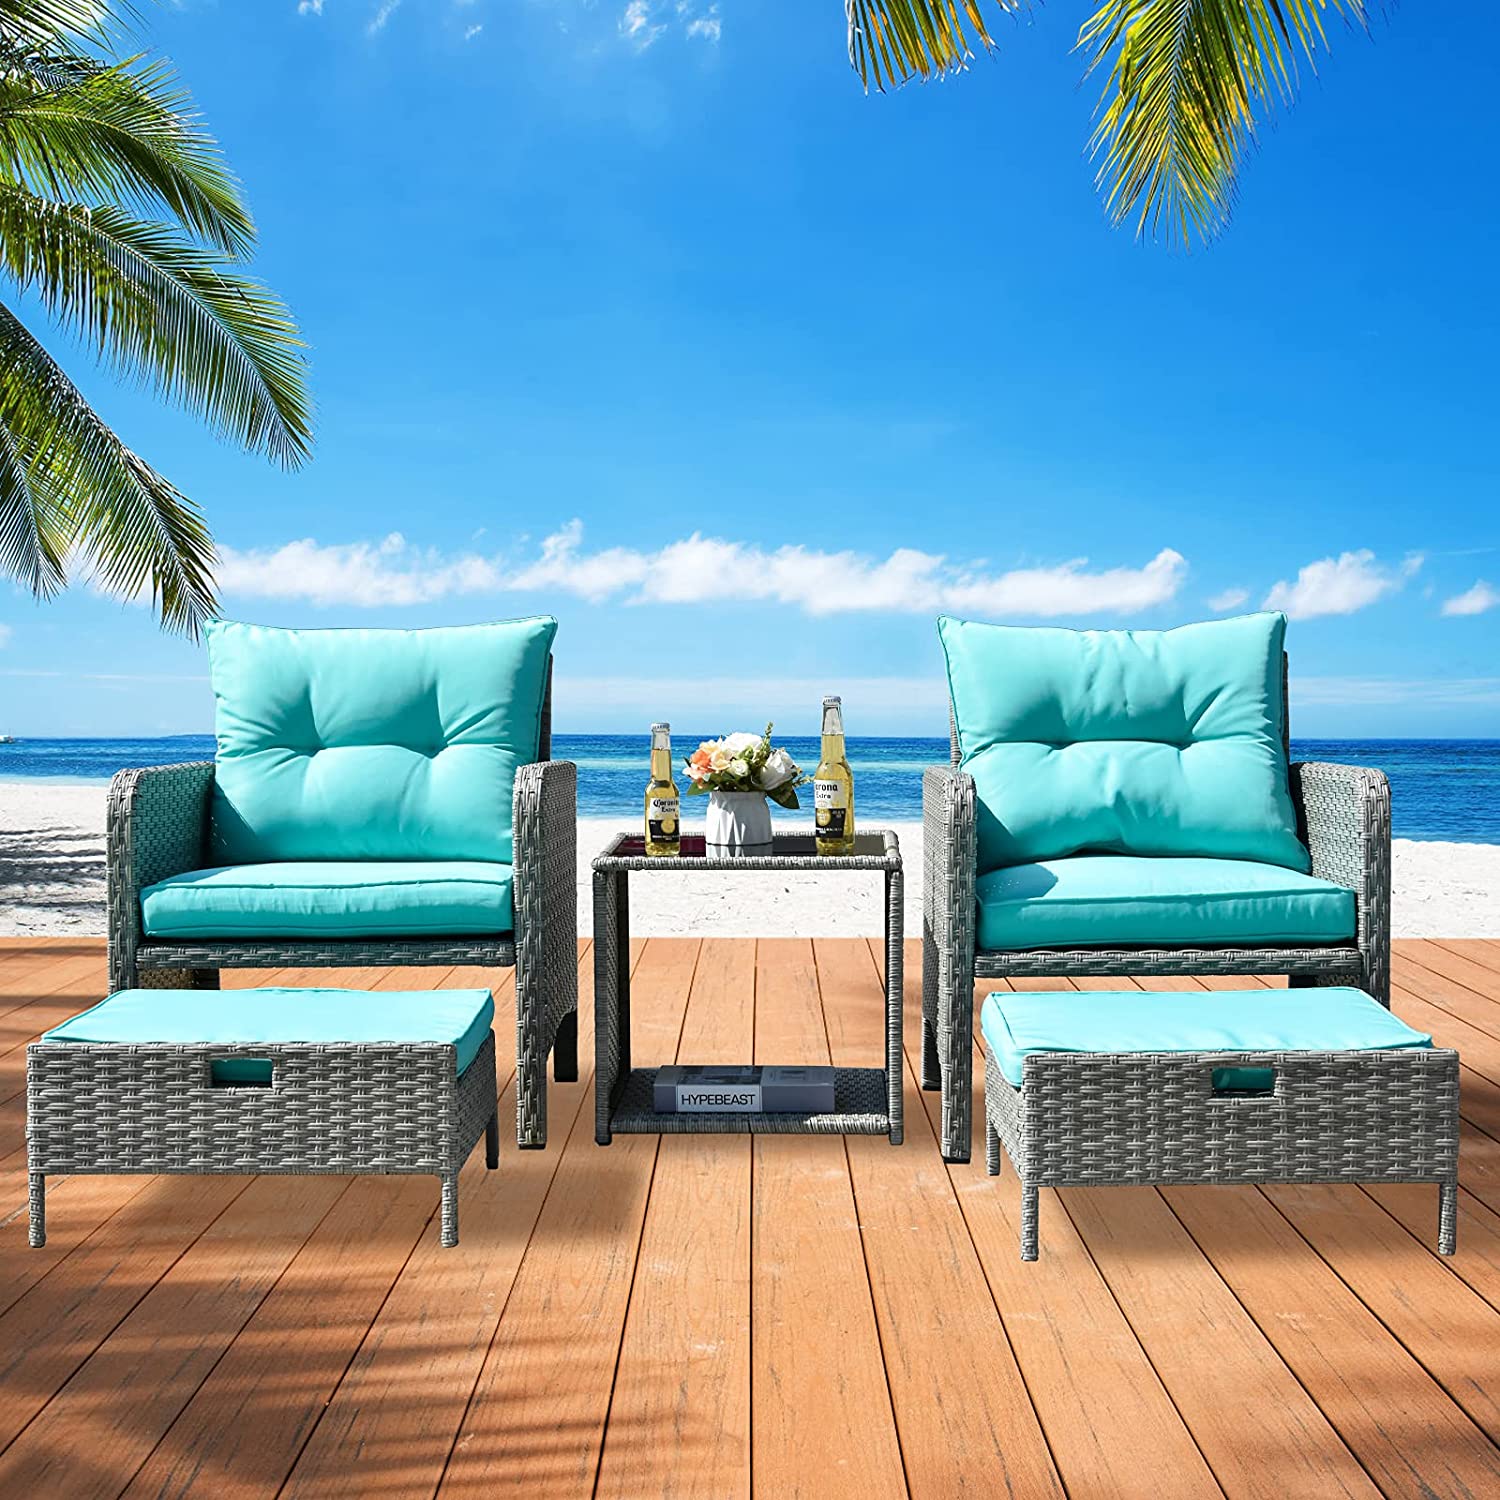 LOCCUS 5-Piece Patio Furniture Set with Ottoman & Table in Sliver & Sky Blue